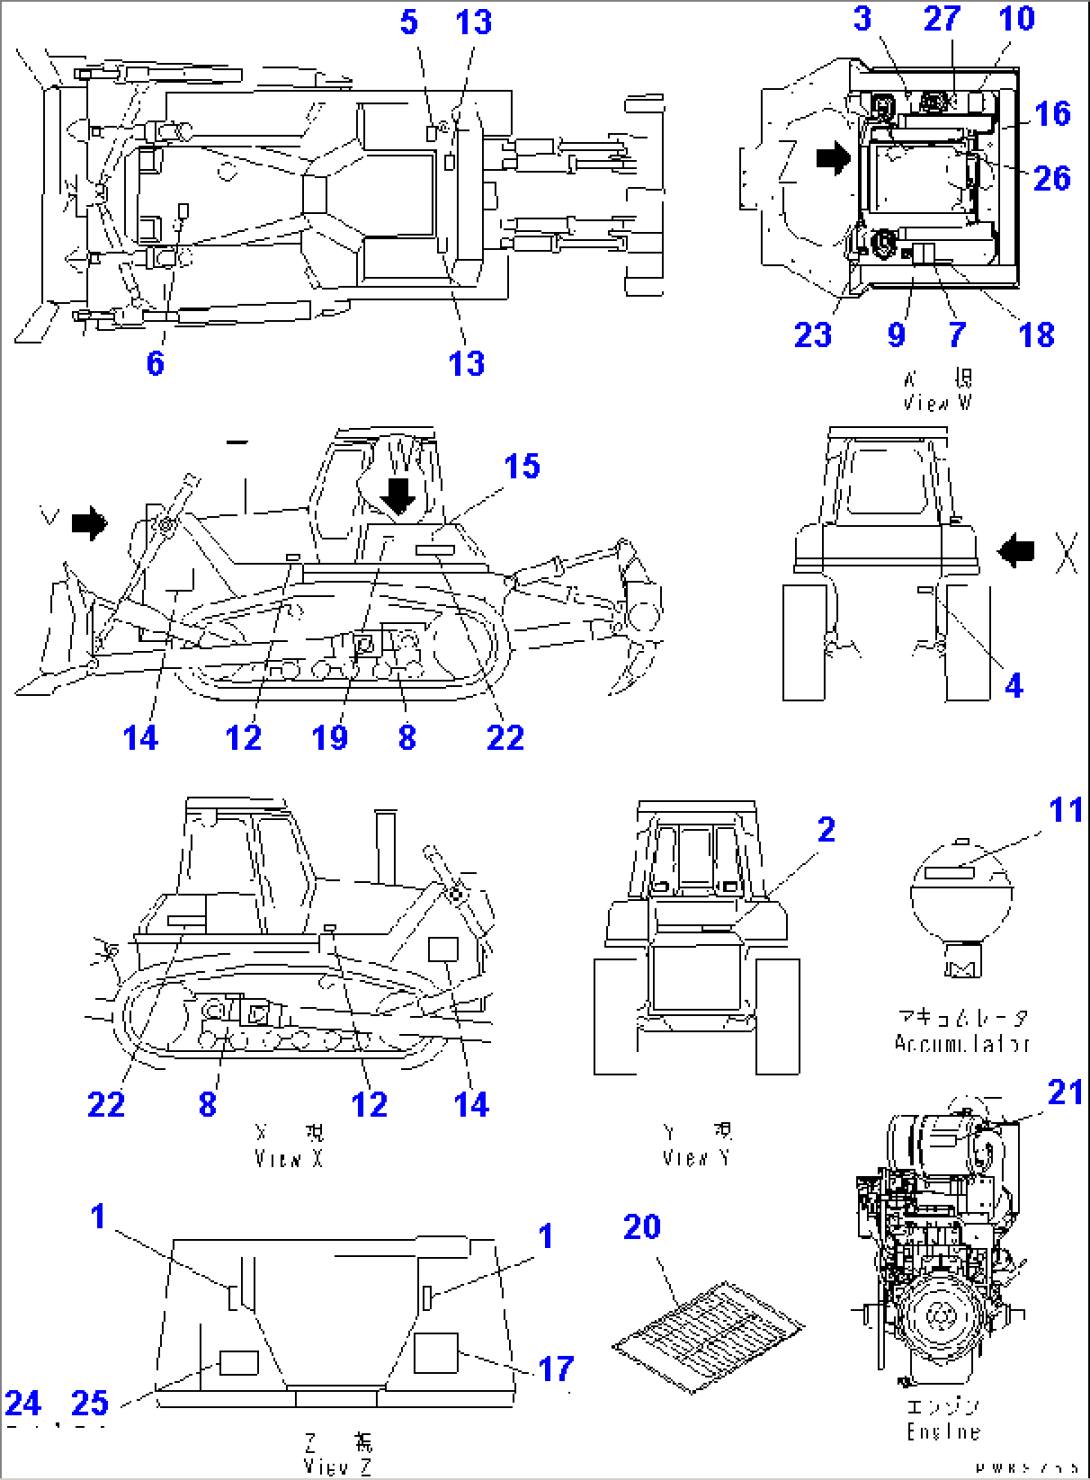 MARKS AND PLATES (RUSSIAN)(#70001-74999)